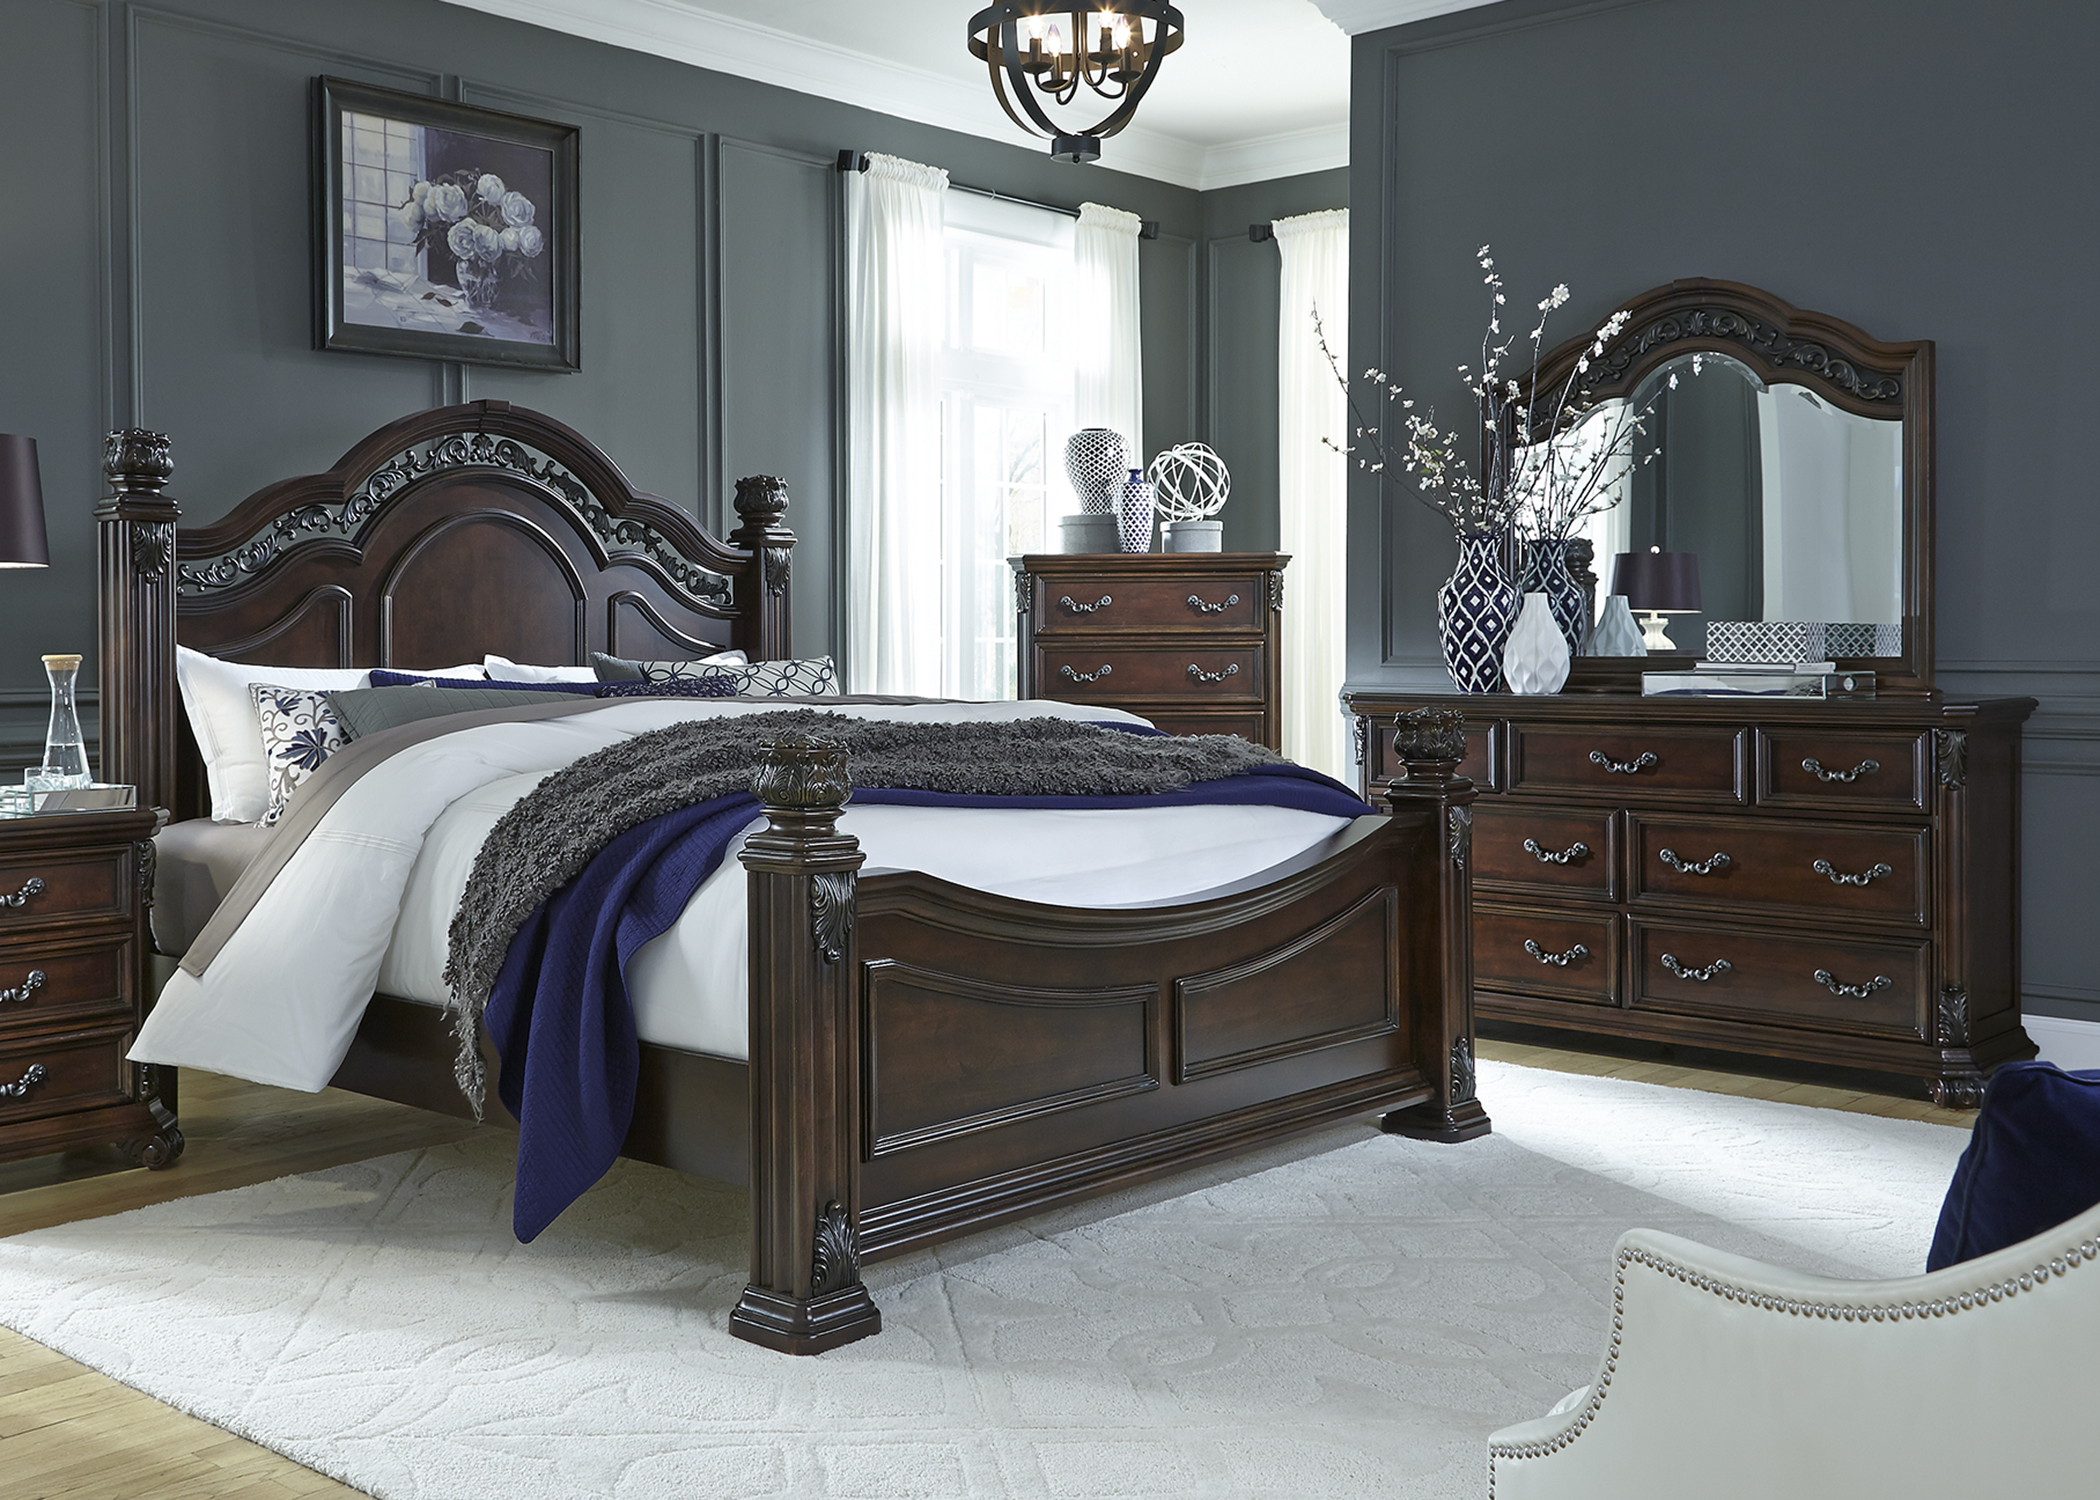 Liberty Furniture Messina Estates Bedroom Queen Poster Bed, Dresser, Mirror, and Chest Collection